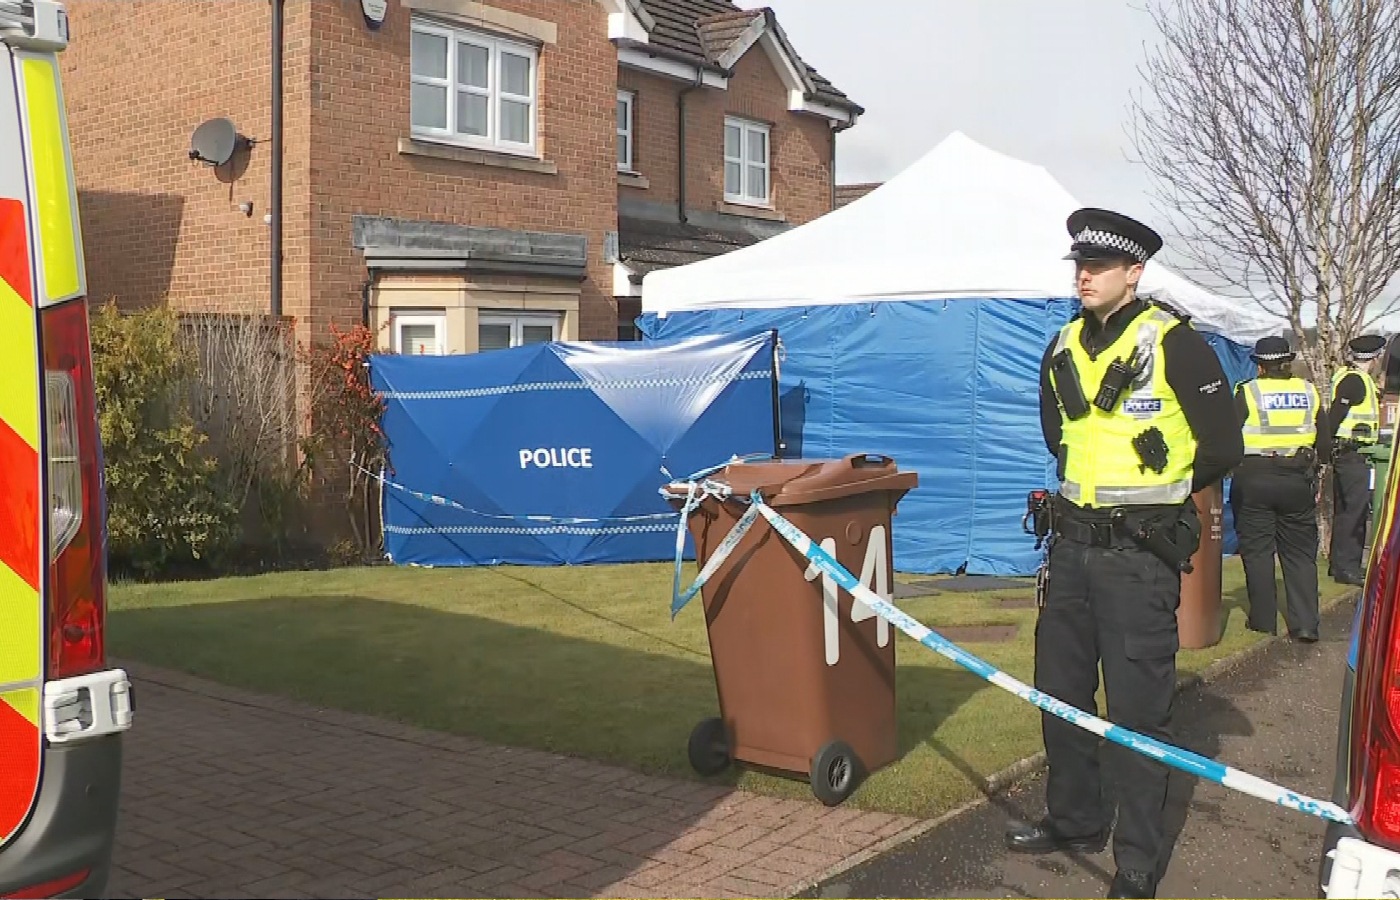 Nicola Sturgeon and Peter Murrell's house was searched over the course of two days.